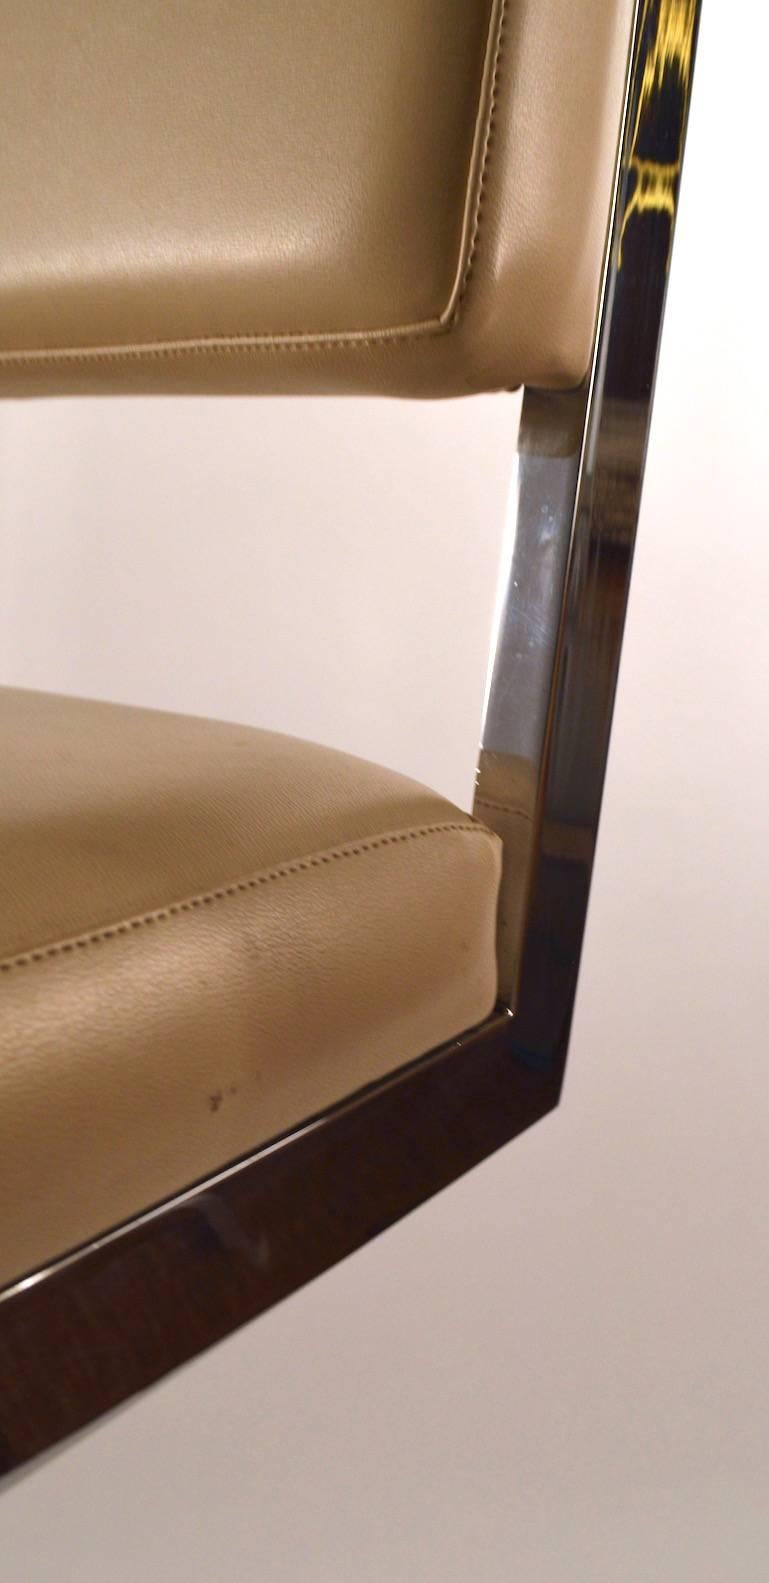 Tall stool with squared chrome frame, upholstered seat and back. Solid, sturdy, and clean, ready to use condition. Design attributed to Milo Baughman.